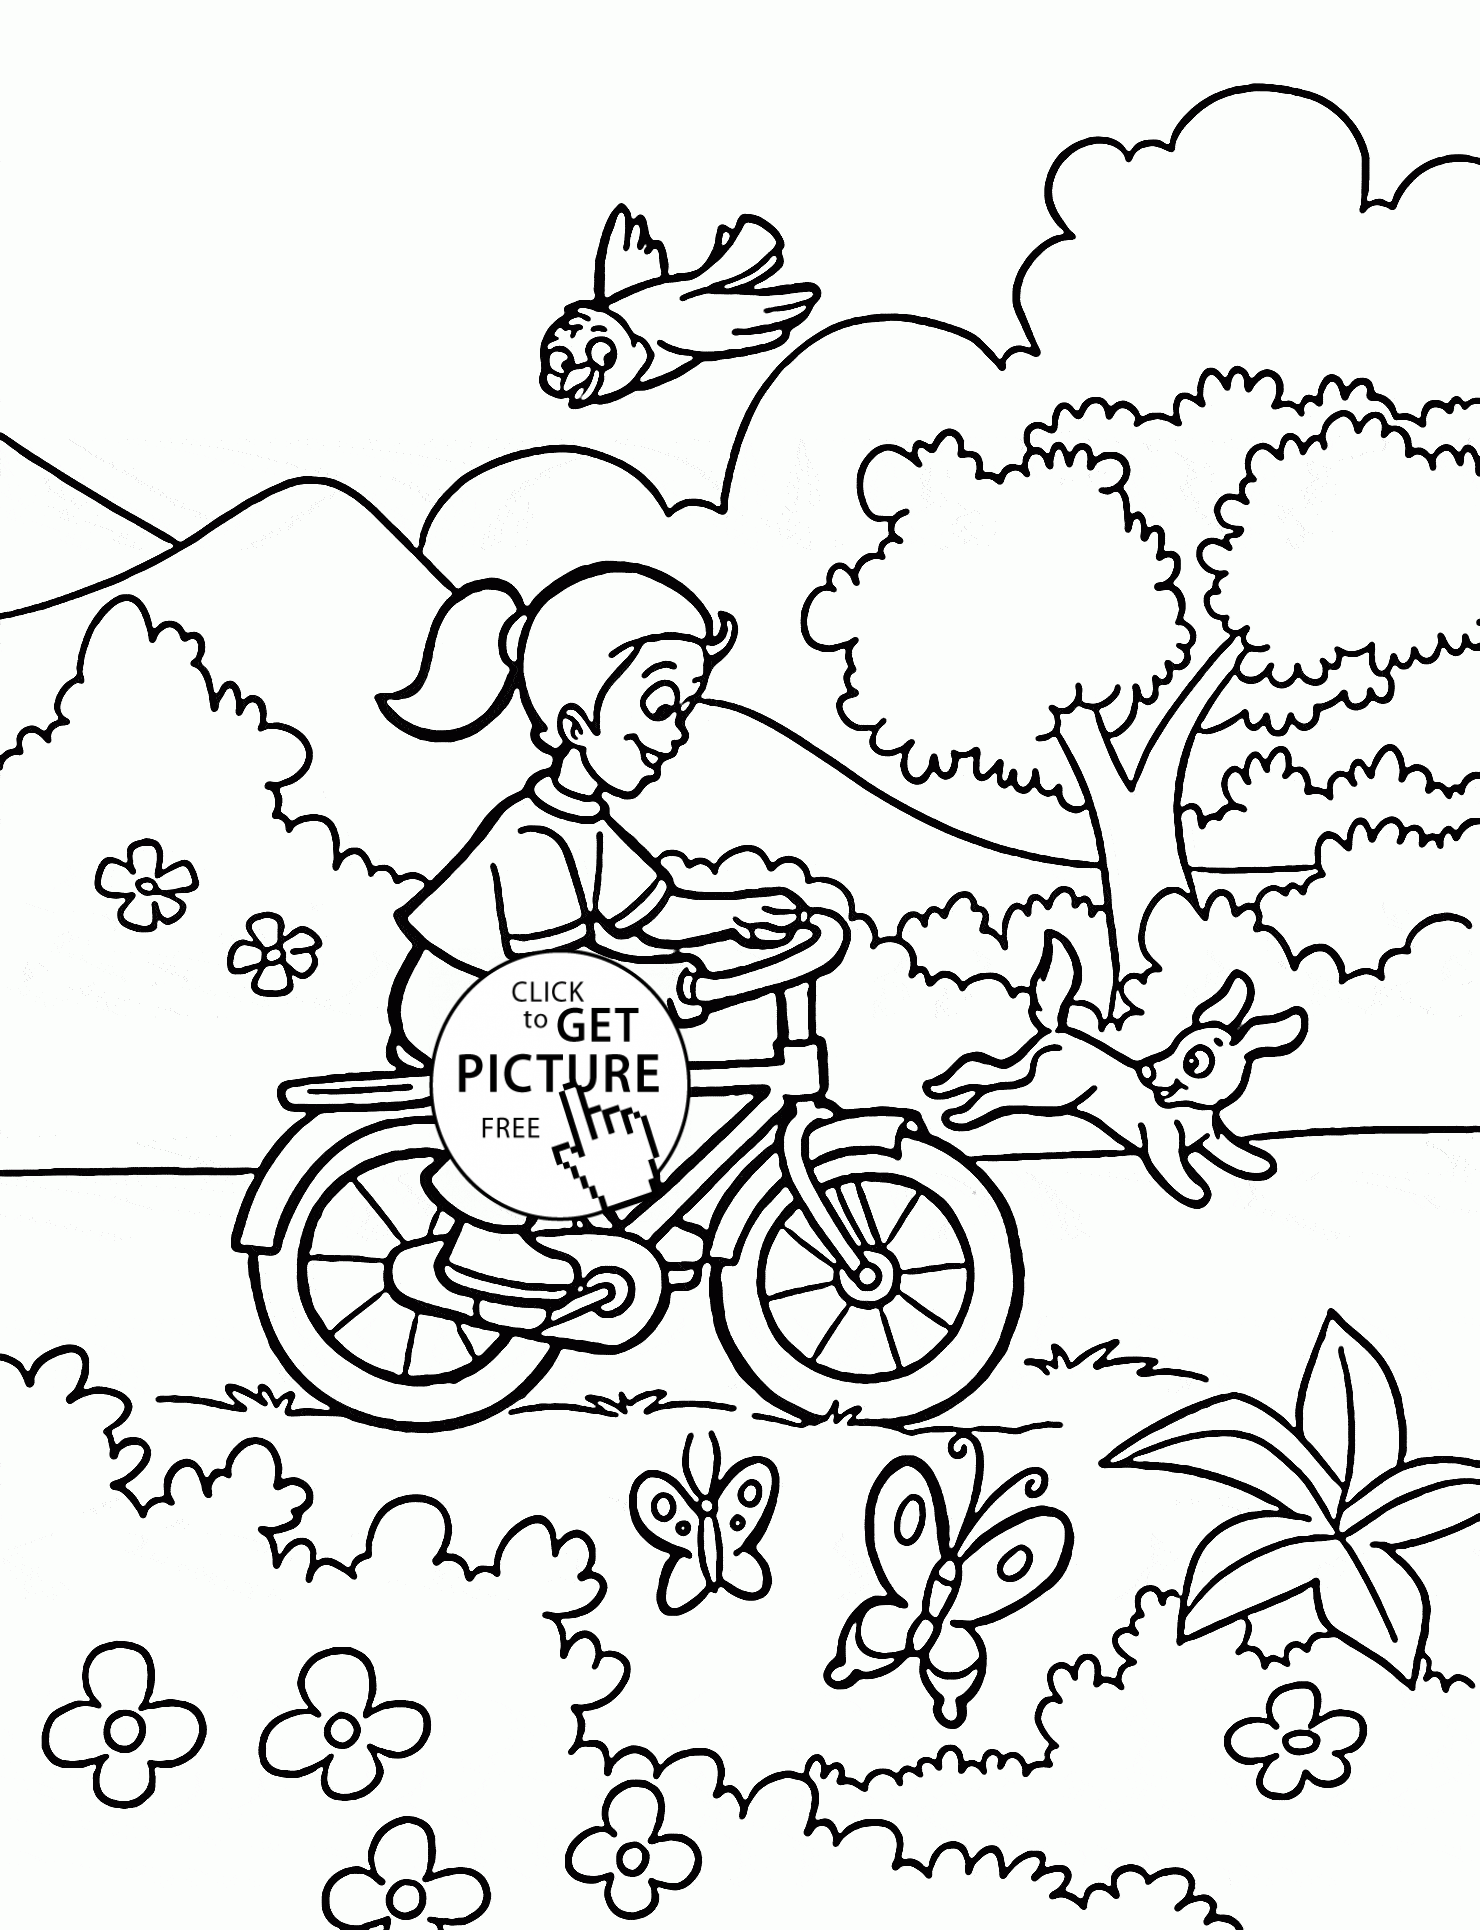 Girl Rides A Bicycle Coloring Page For Kids, Spring Coloring Pages